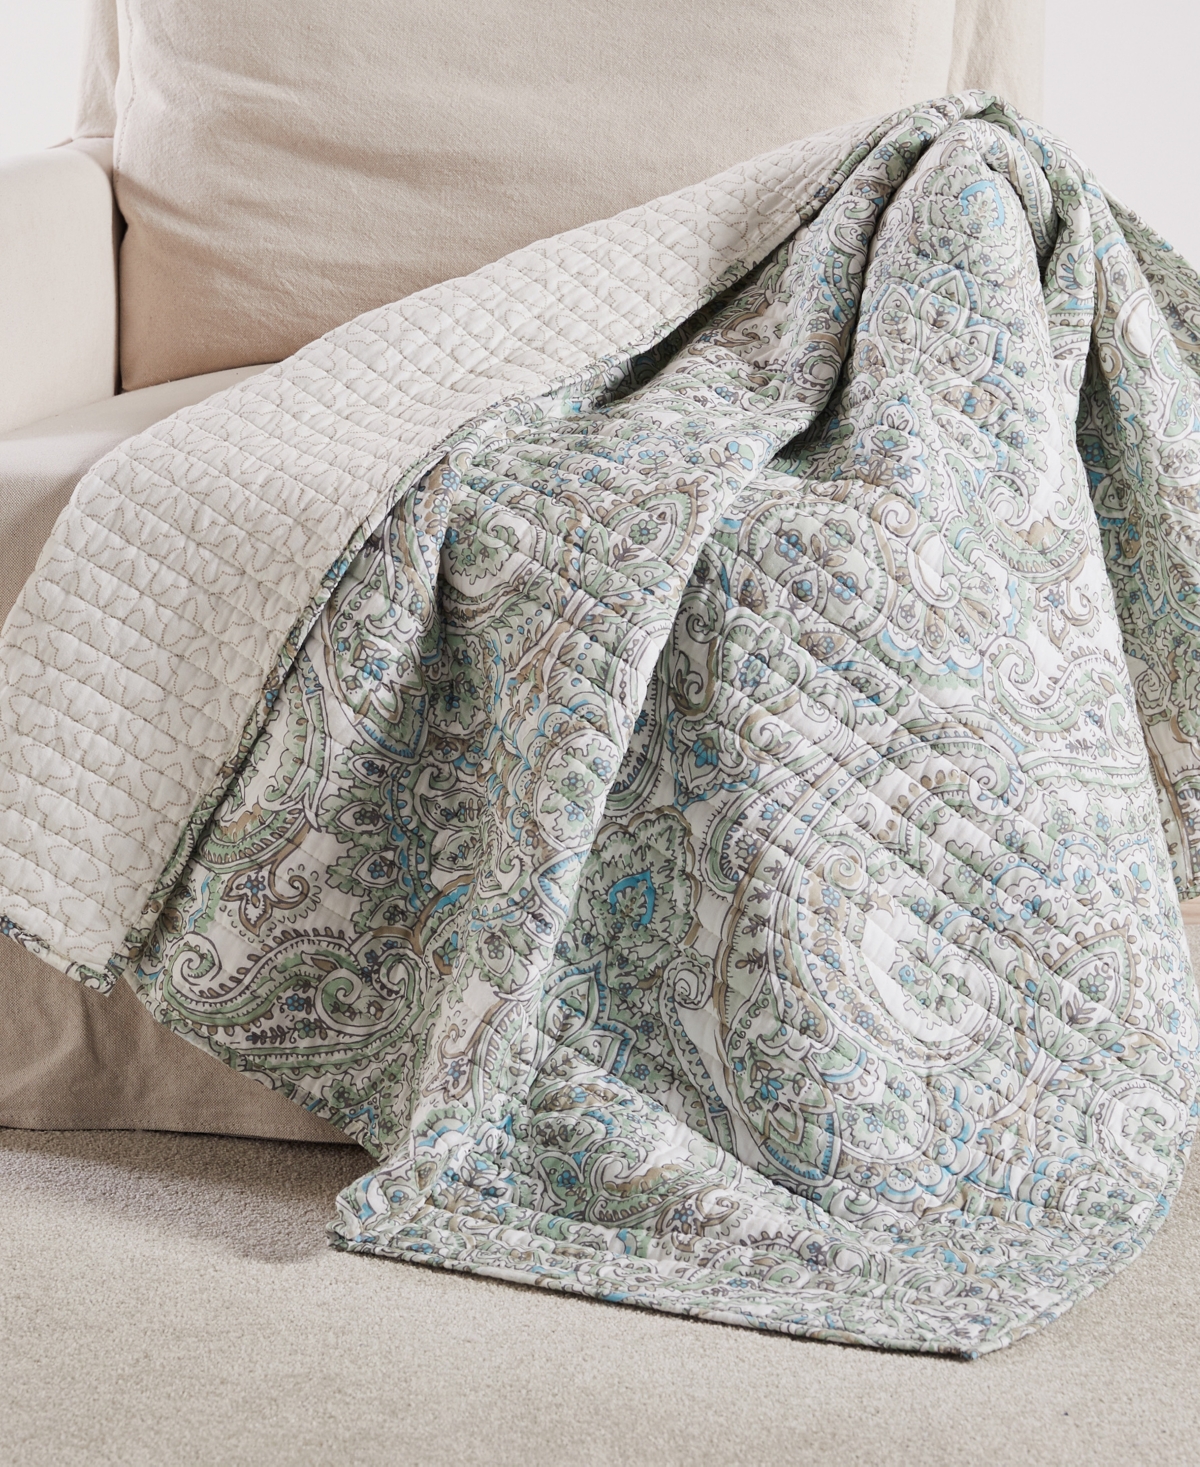 Levtex Assisi Reversible Quilted Throw, 50" X 60" In Mint